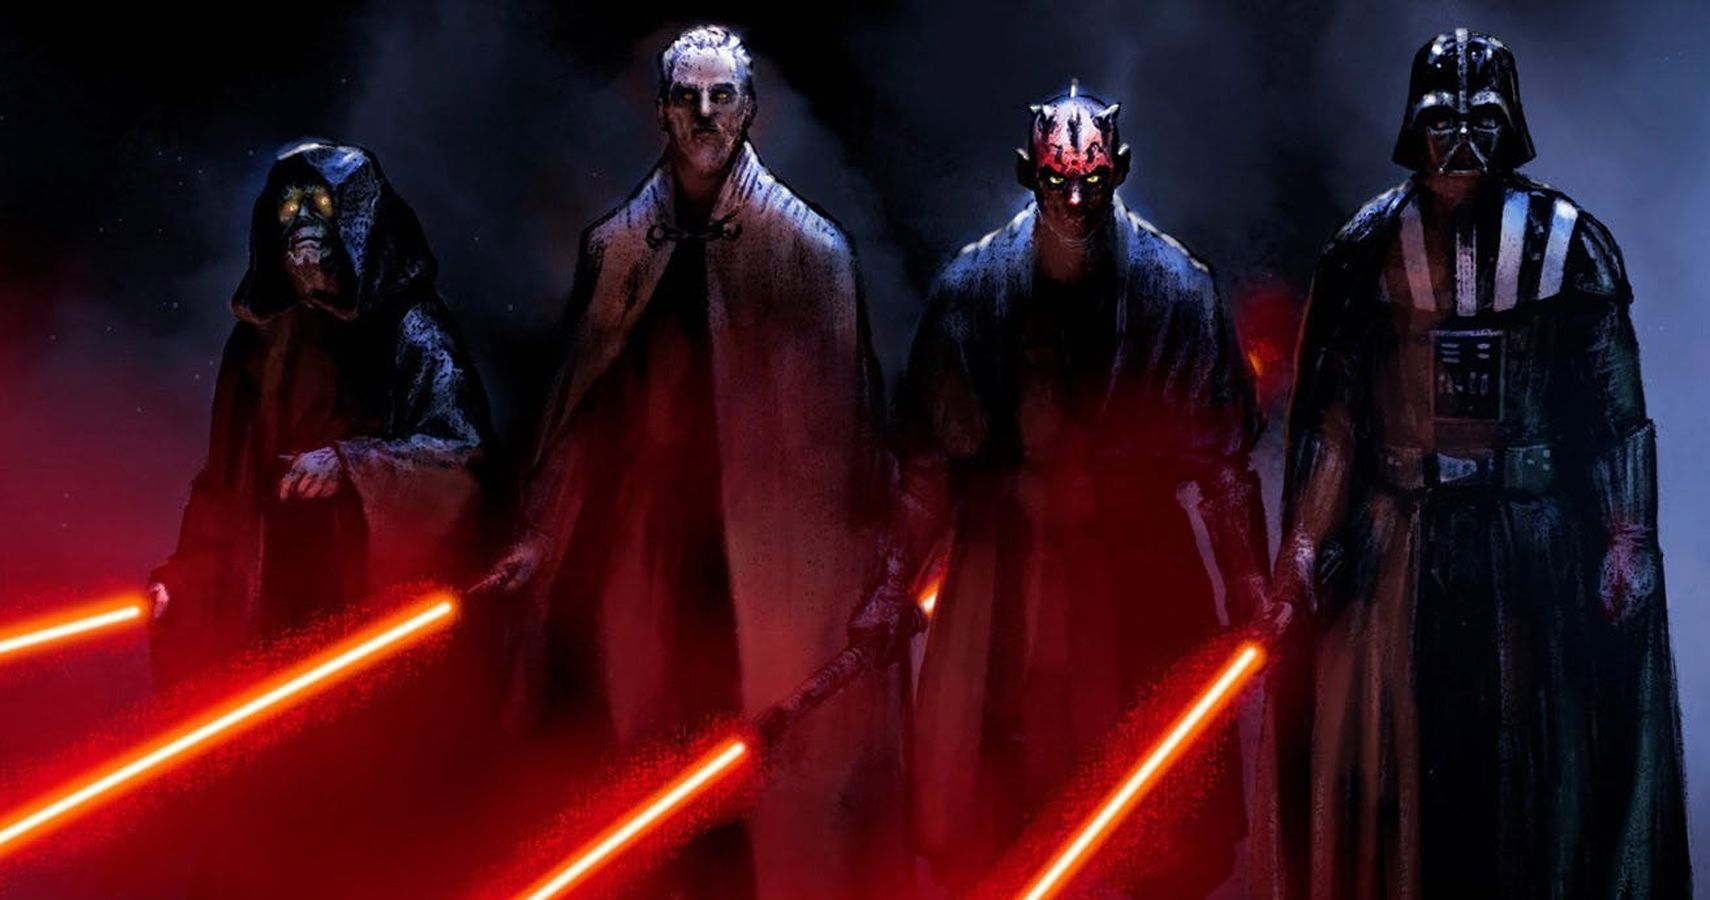 25 Star Wars Sith From Weakest To Strongest Officially Ranked